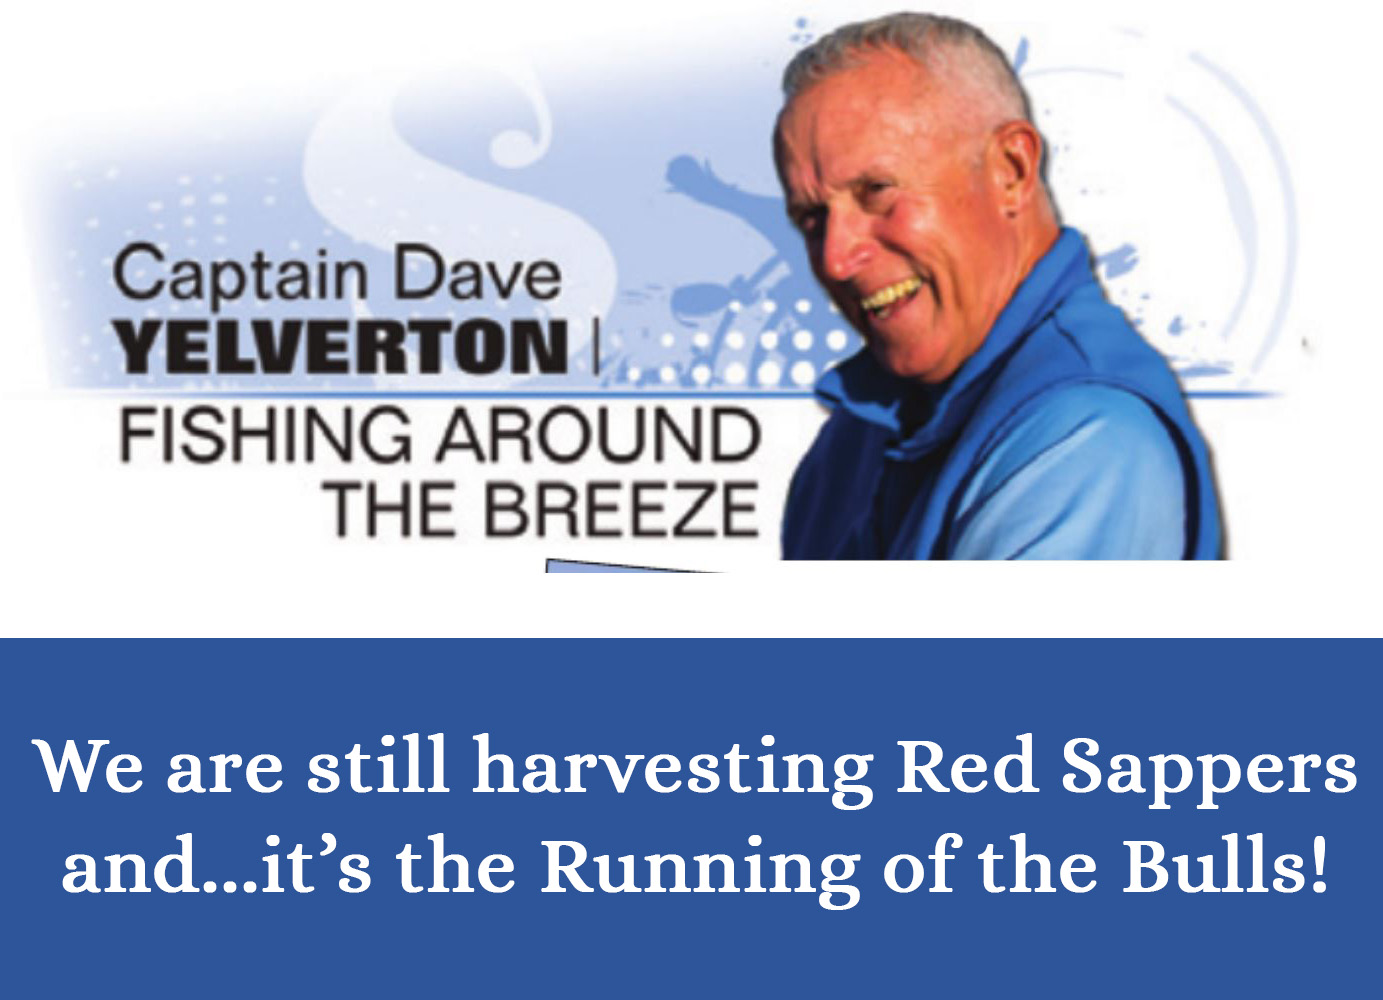 November 2023 - We are still harvesting Red Sappers and...it’s the Running of the Bulls! - Splash! Magazine Article with Capt Dave Yelverton